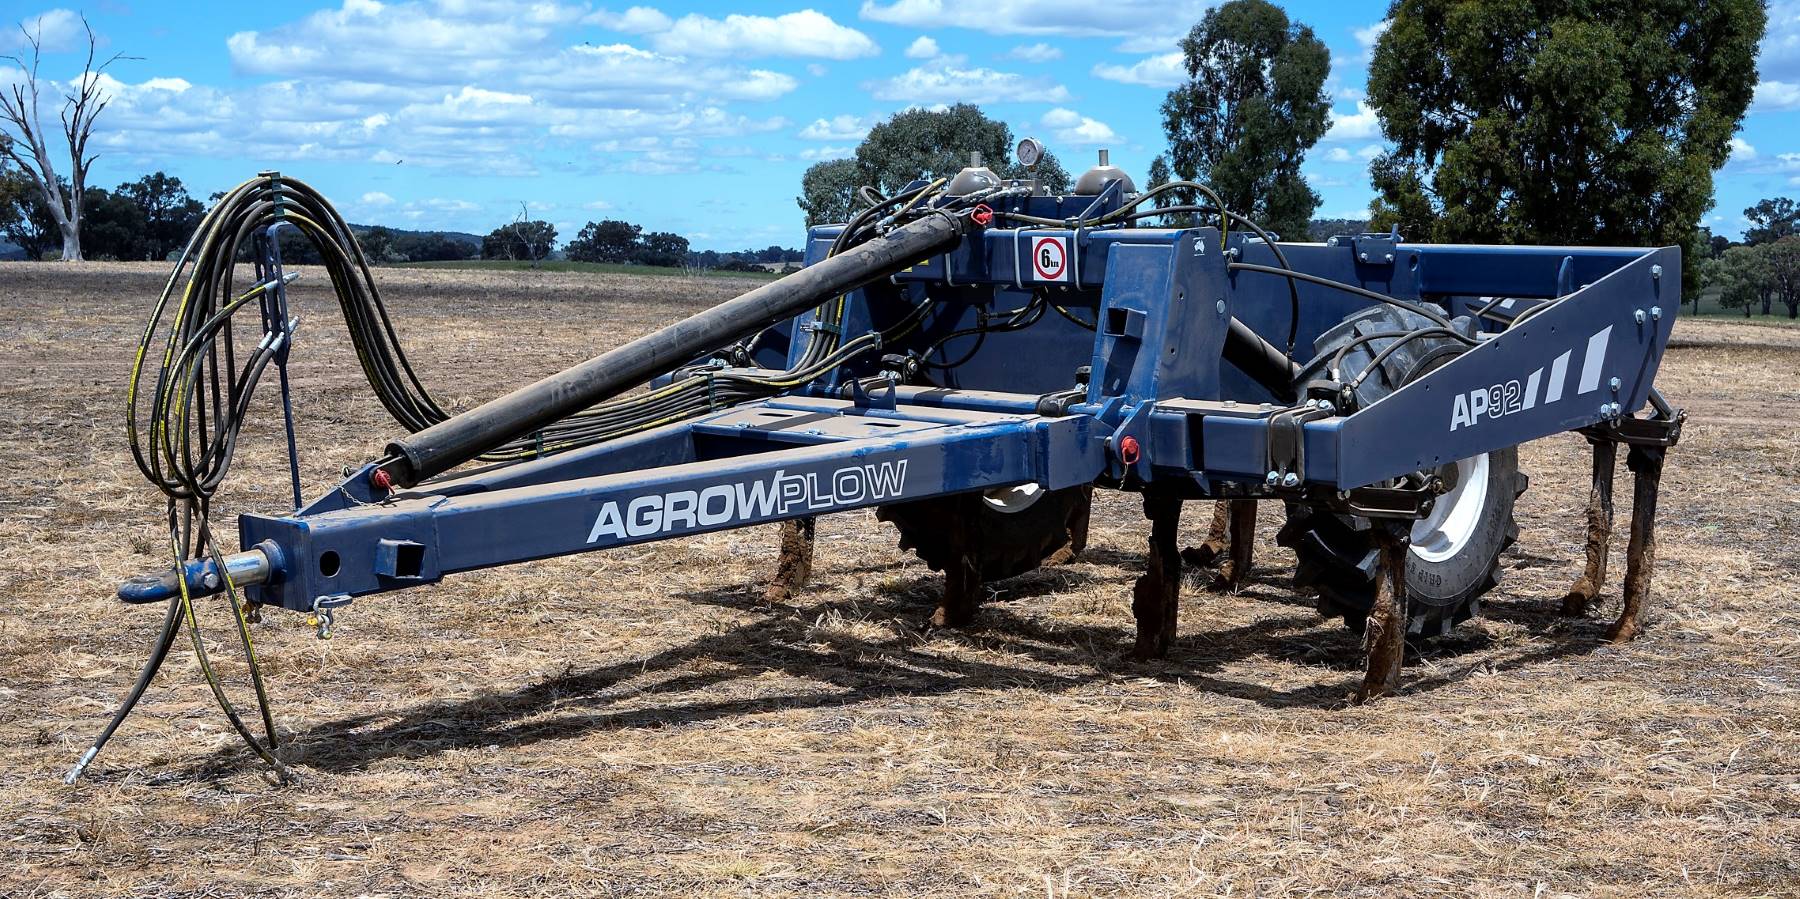 Agrowplow AP92 7 Shank Plough can rip up to 600mm depths